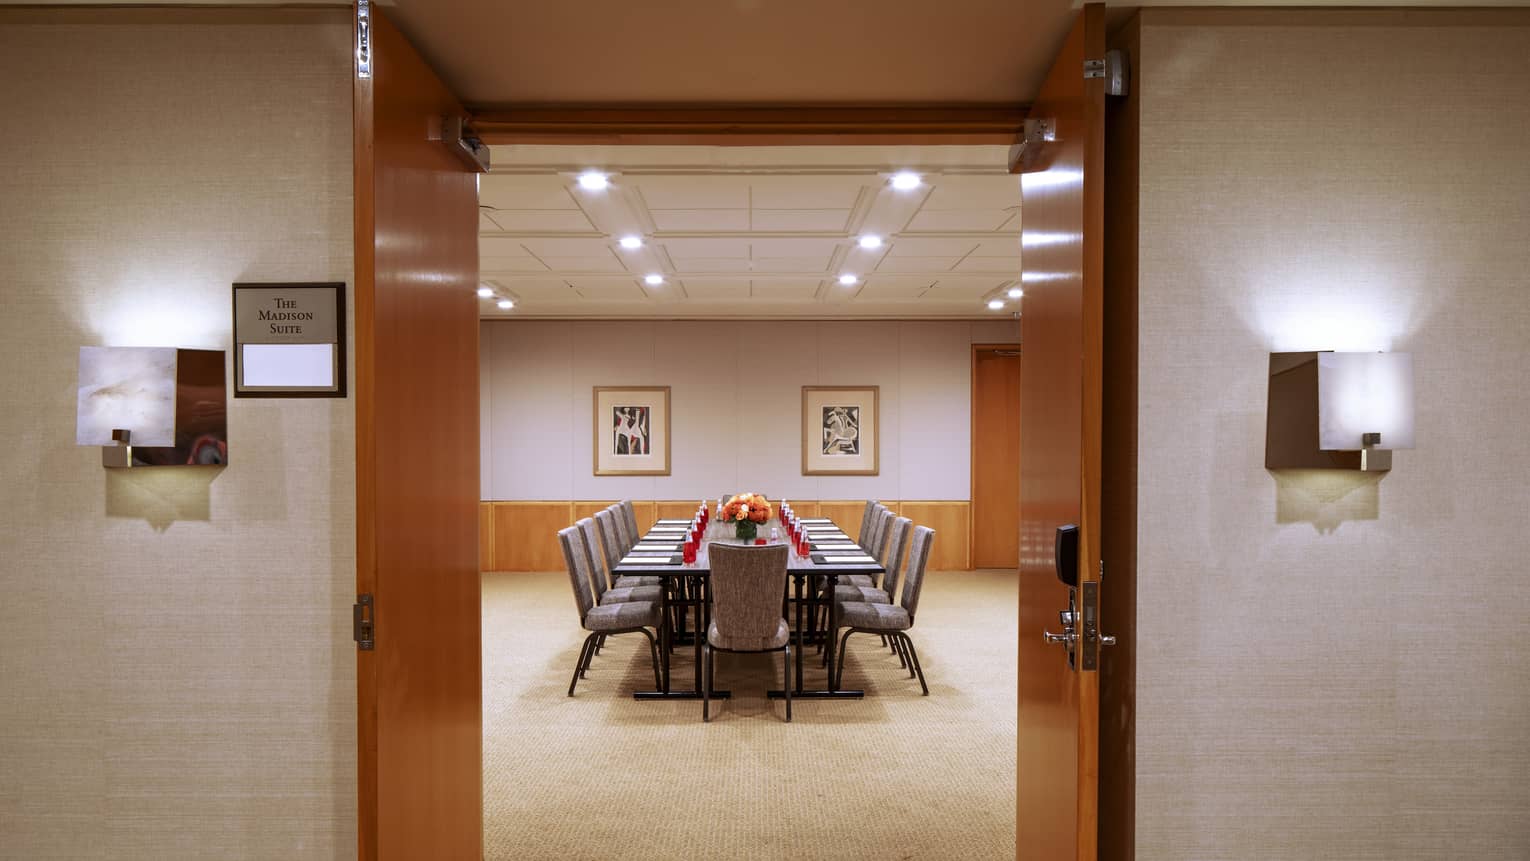 Two dark wooden doors are opened to reveal a function room with a long rectangular boardroom table with an orange floral arrangement in the center 